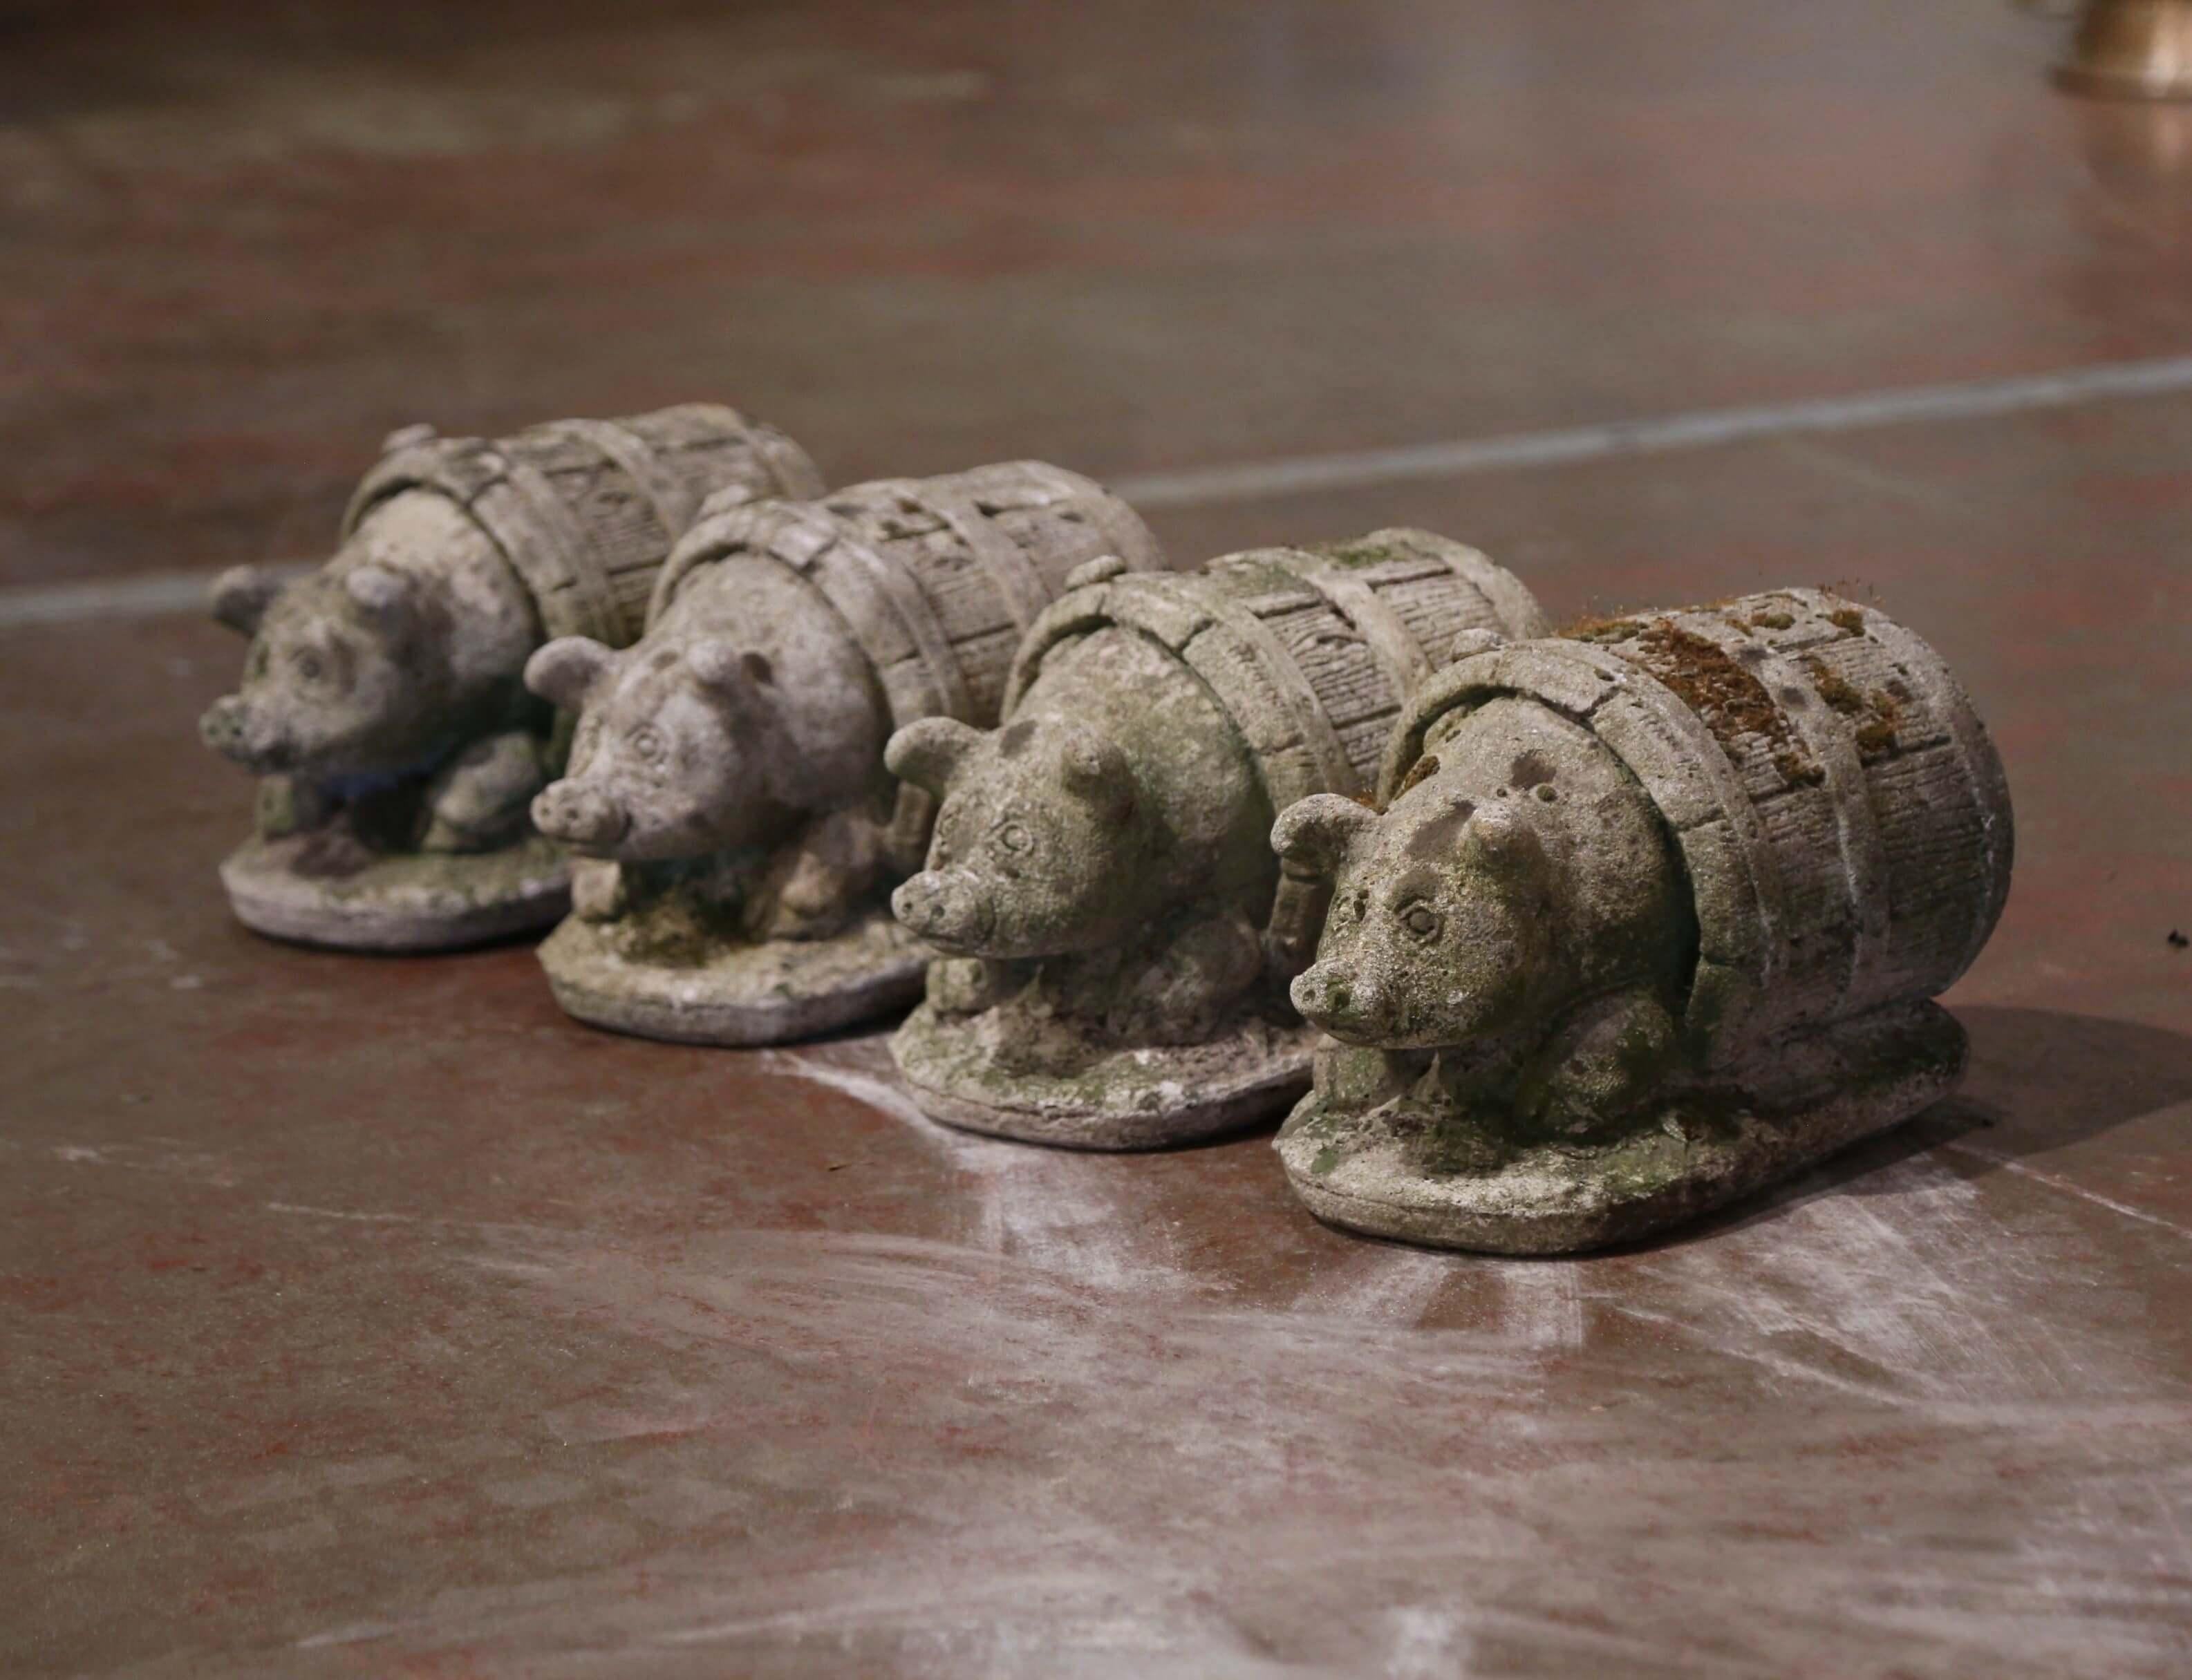 Decorate a patio or garden with this set of antique pig sculpture compositions. Crafted in France circa 1880 and carved of concrete, each sculpture features a pig resting inside a barrel. The cheerful pig compositions are in excellent condition and